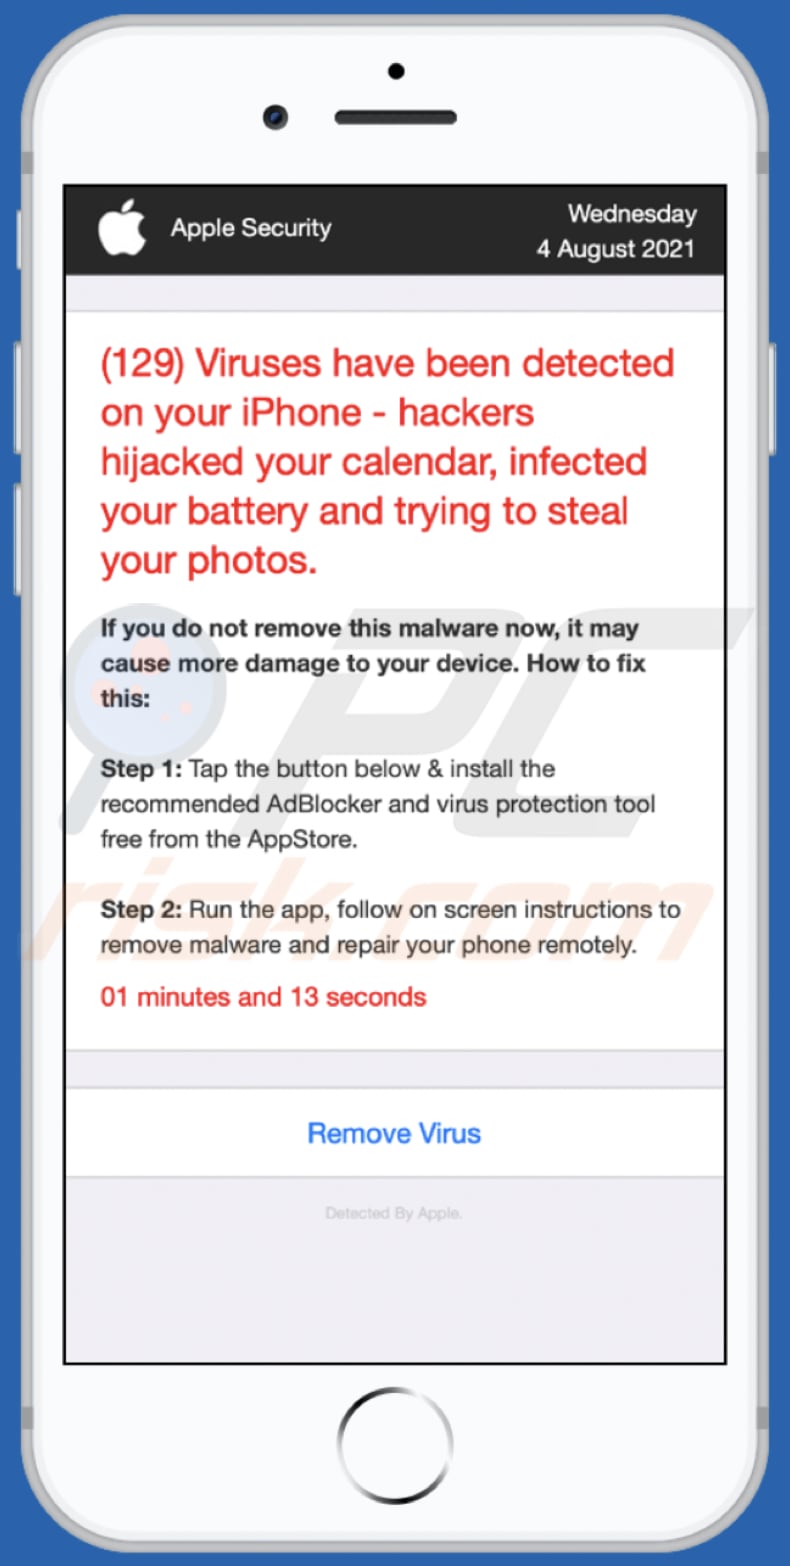 hackers hijacked your calendar infected your battery pop-up scam background page